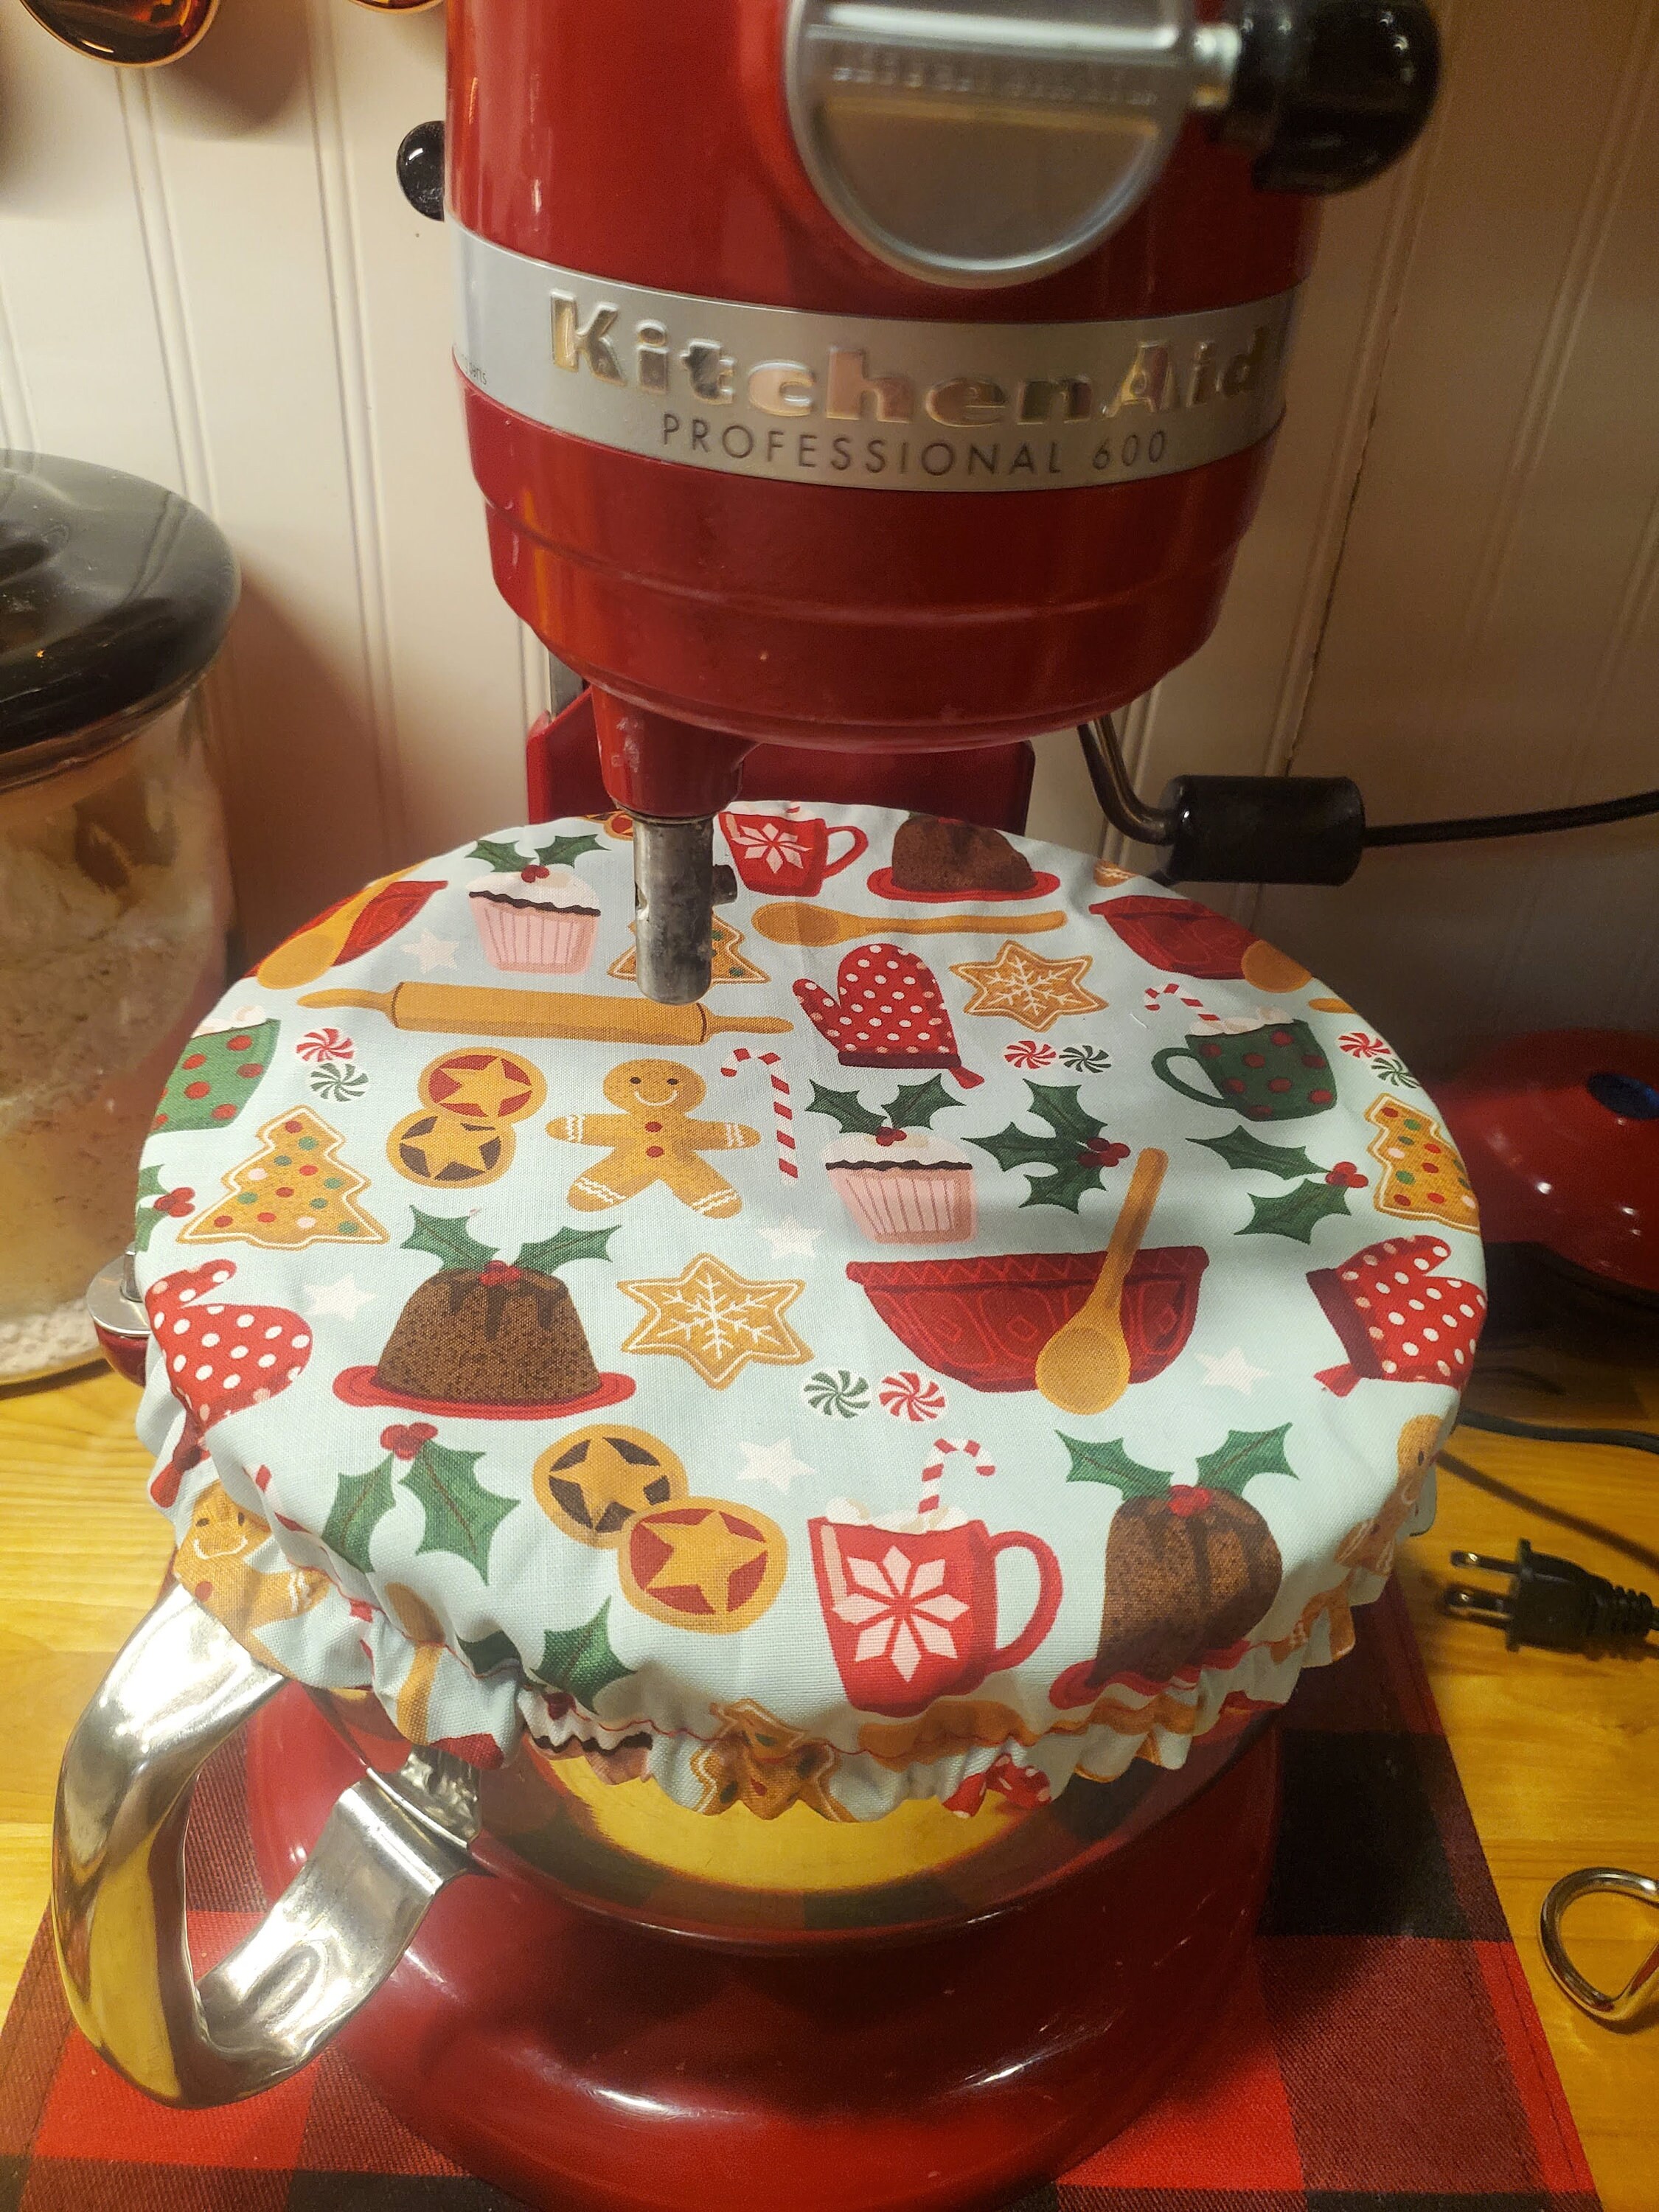 Where can I find a new bowl? : r/Kitchenaid